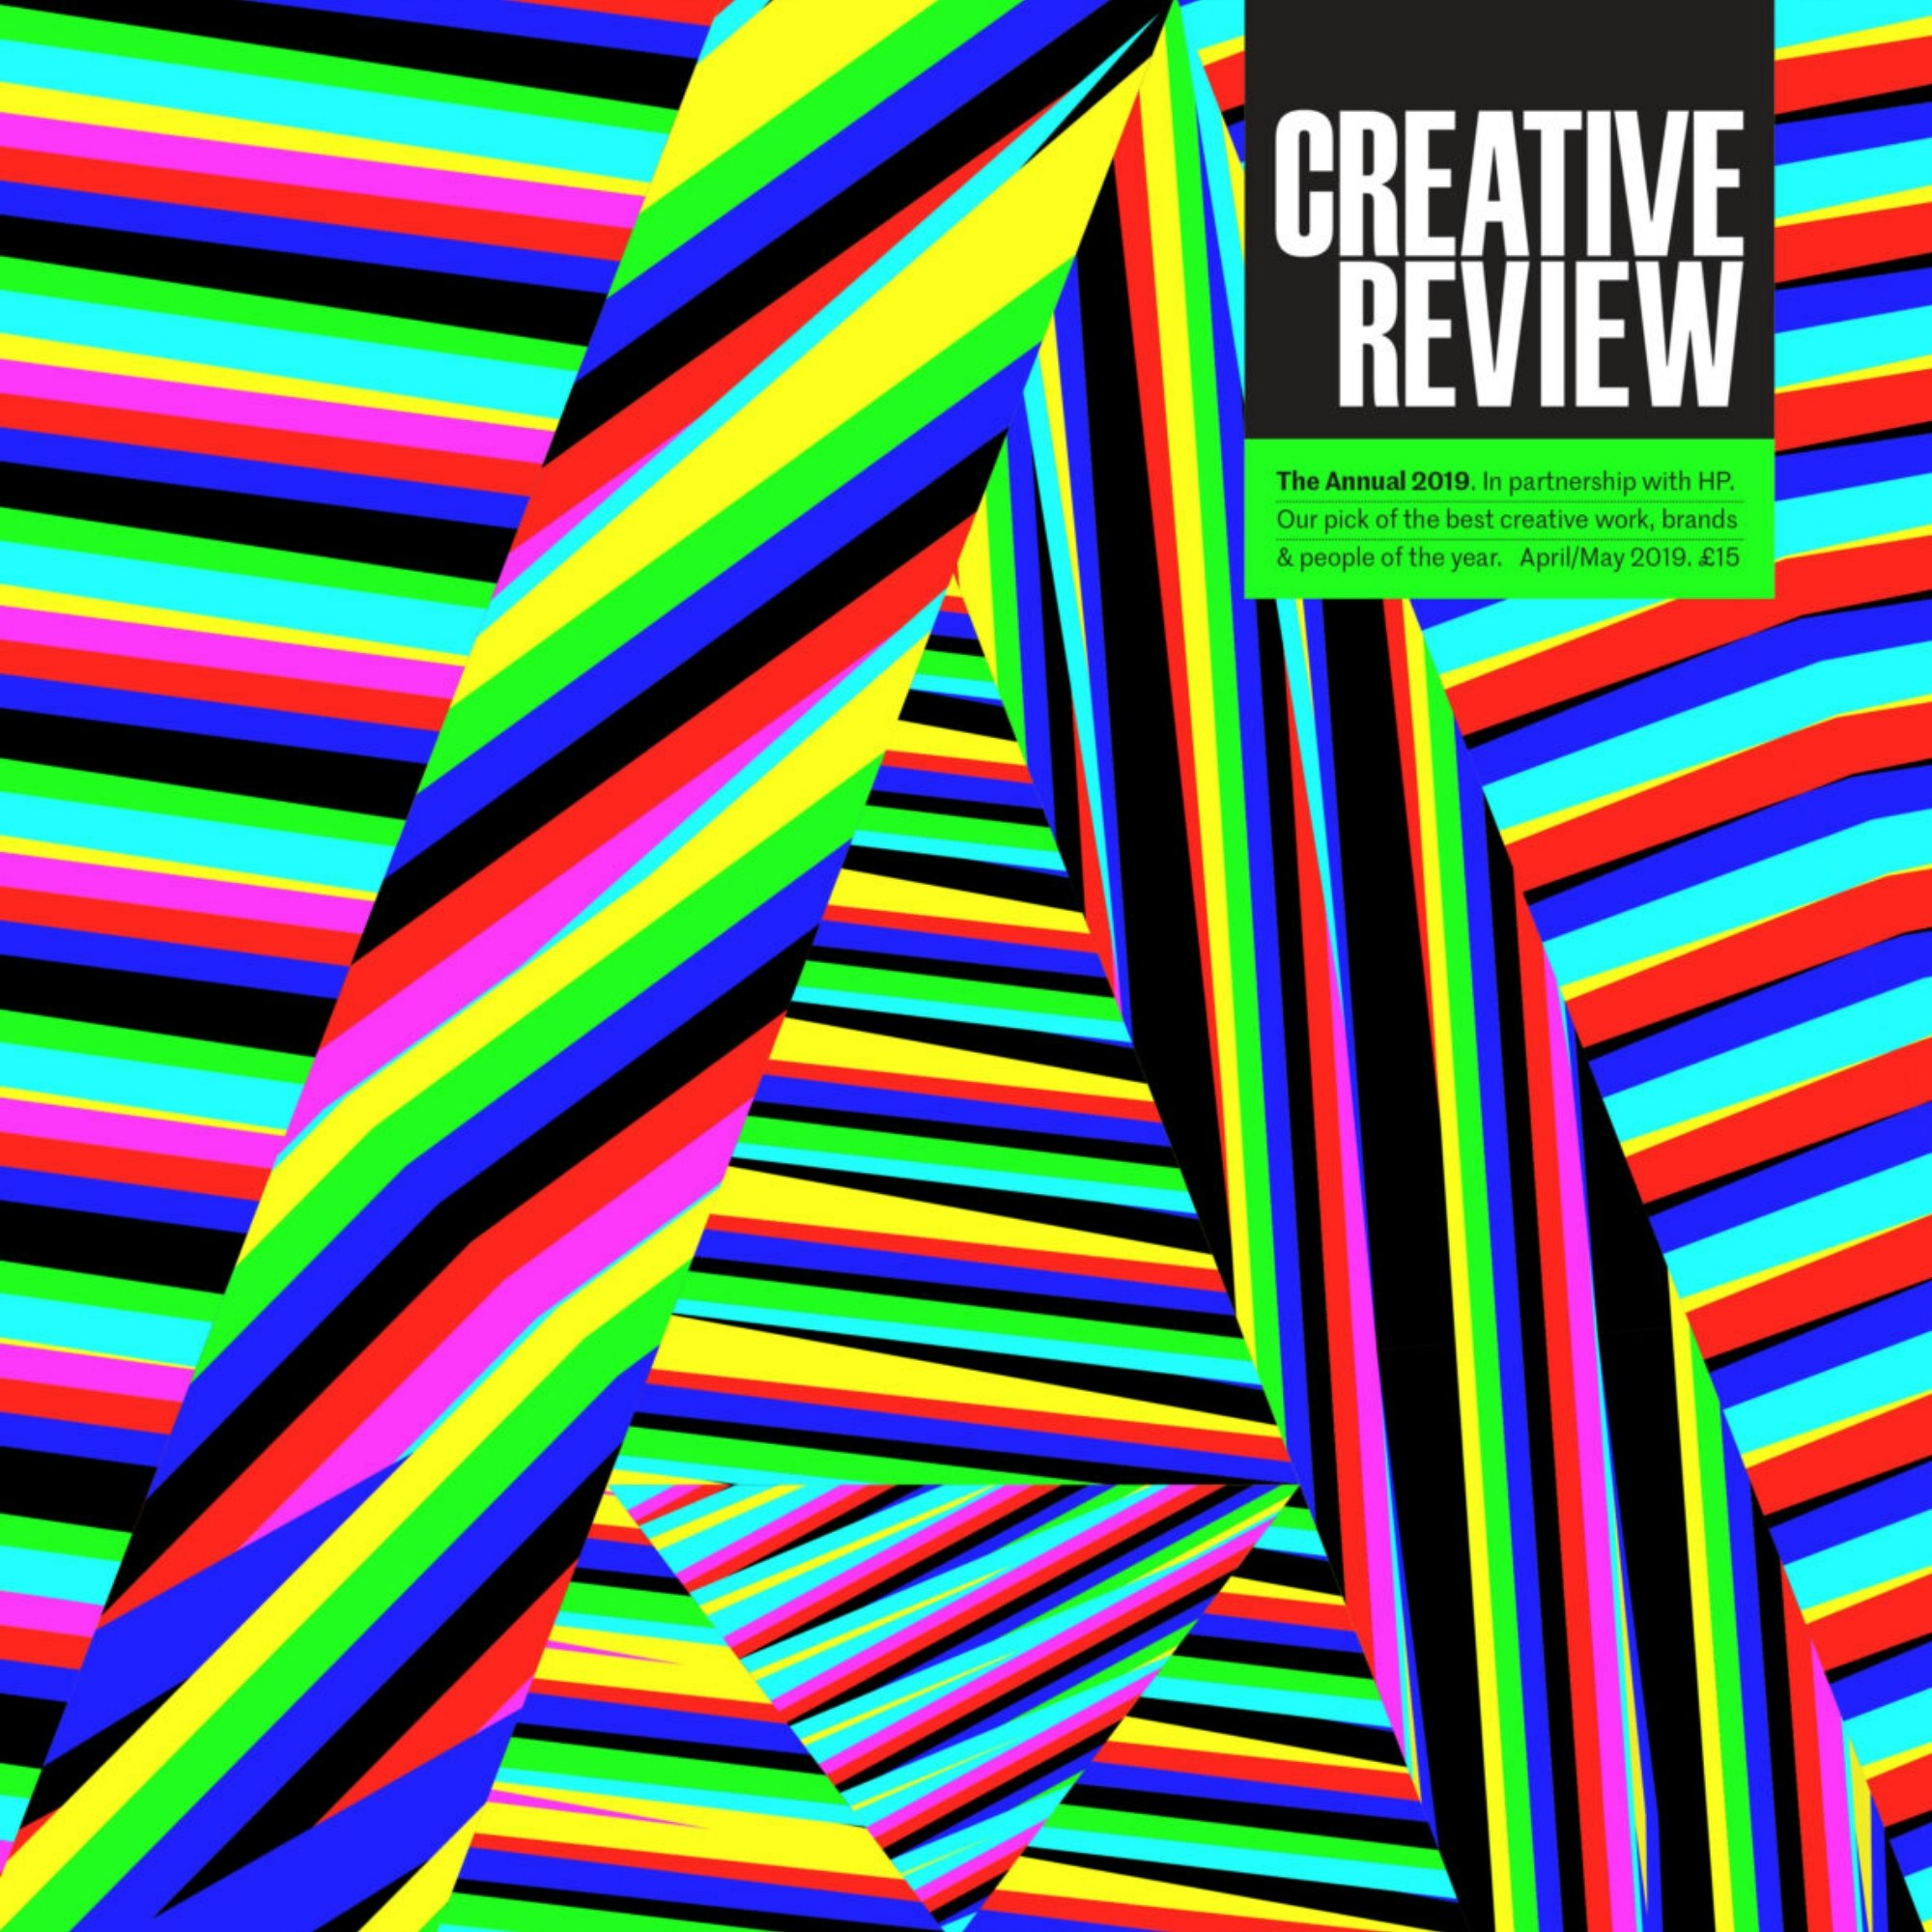 Creative Review - The Annual 2019